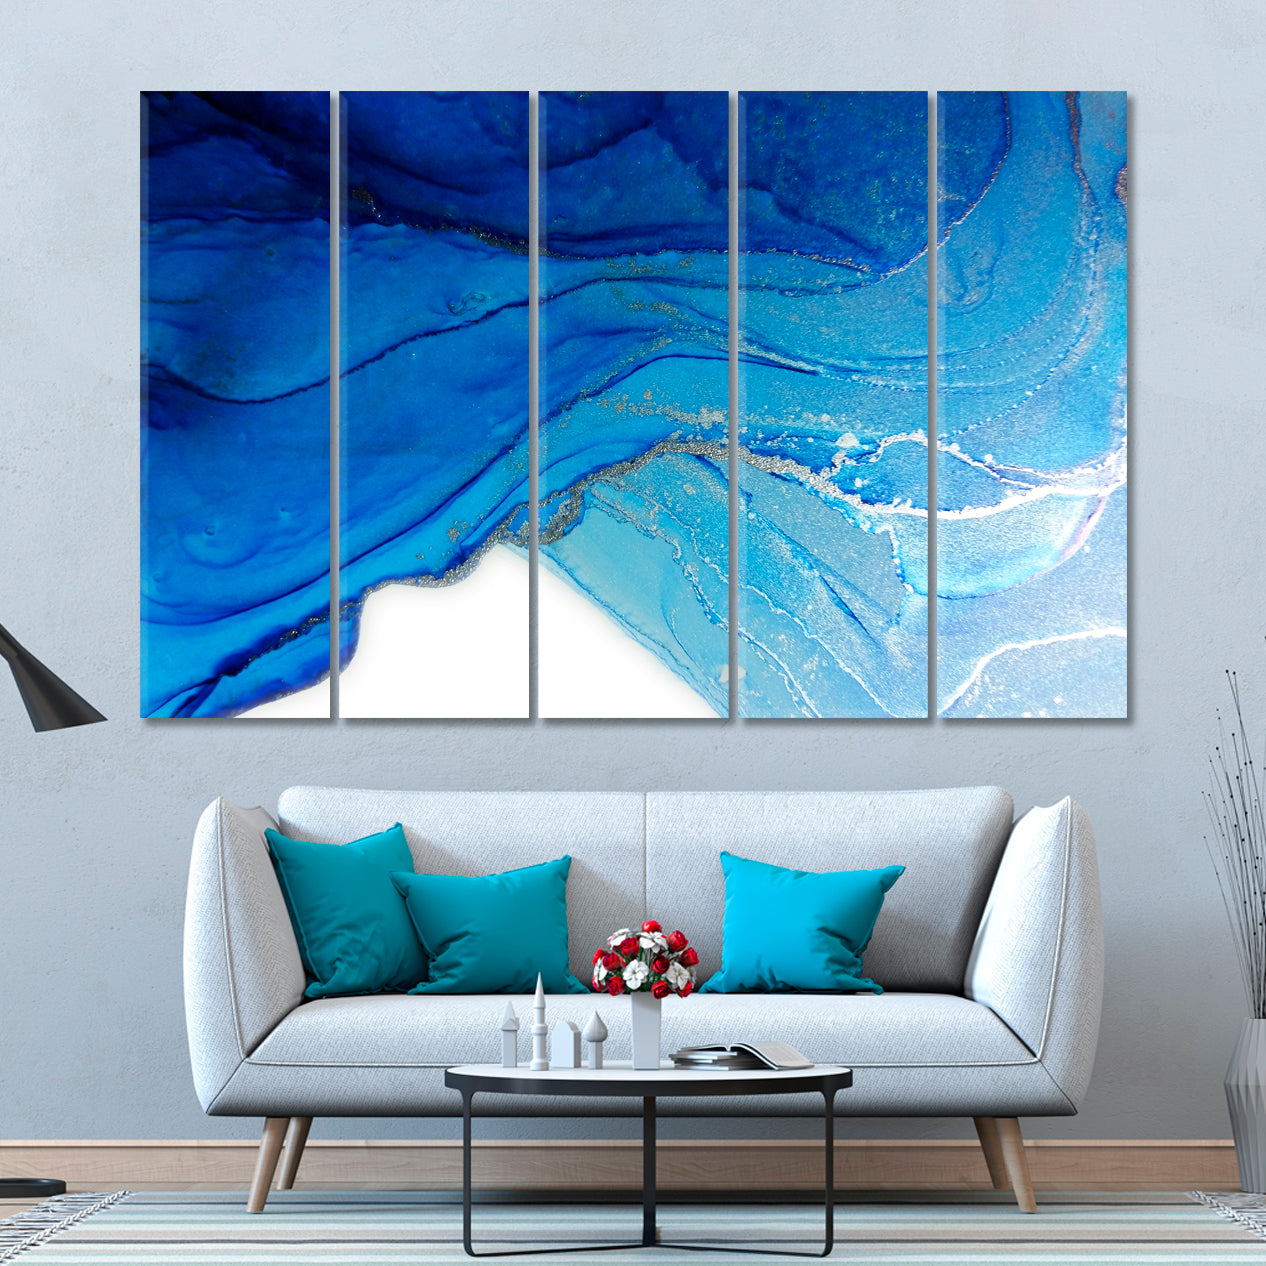 FROST AND WINTER Marble Shades Blue Tornado Abstract Fluid Fluid Art, Oriental Marbling Canvas Print Artesty 5 panels 36" x 24" 